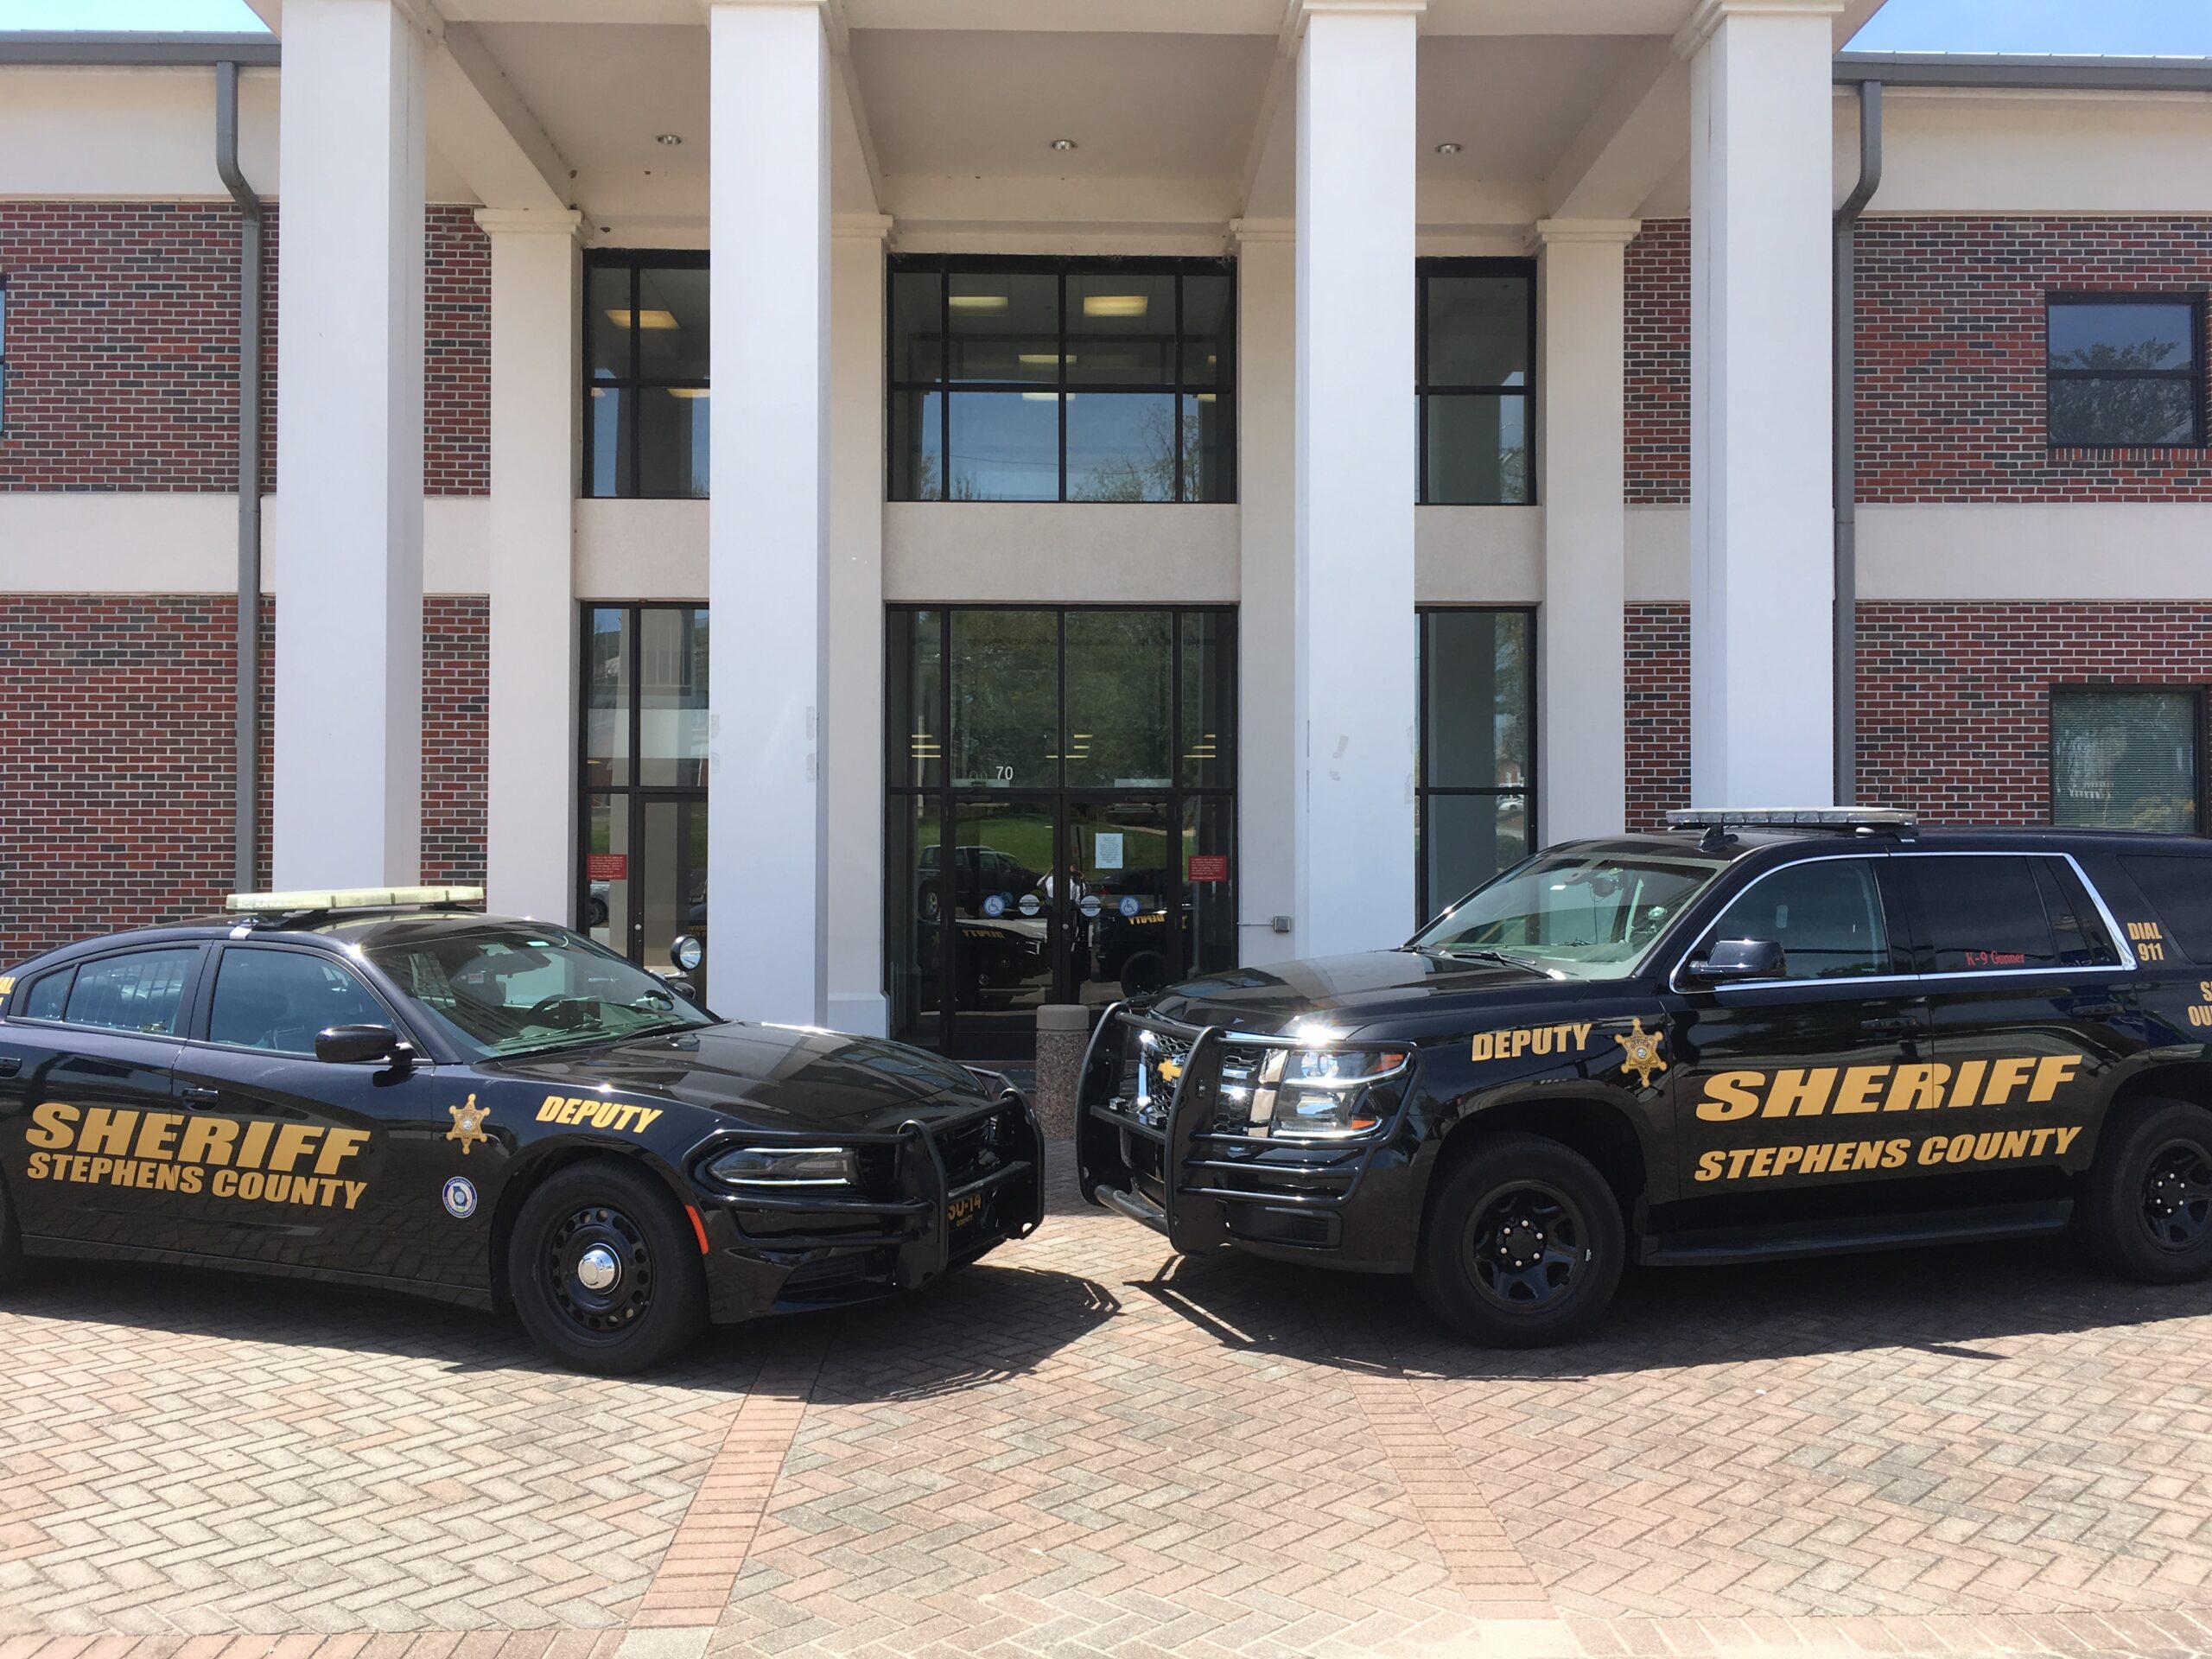 Image of Stephens County Sheriff's Office